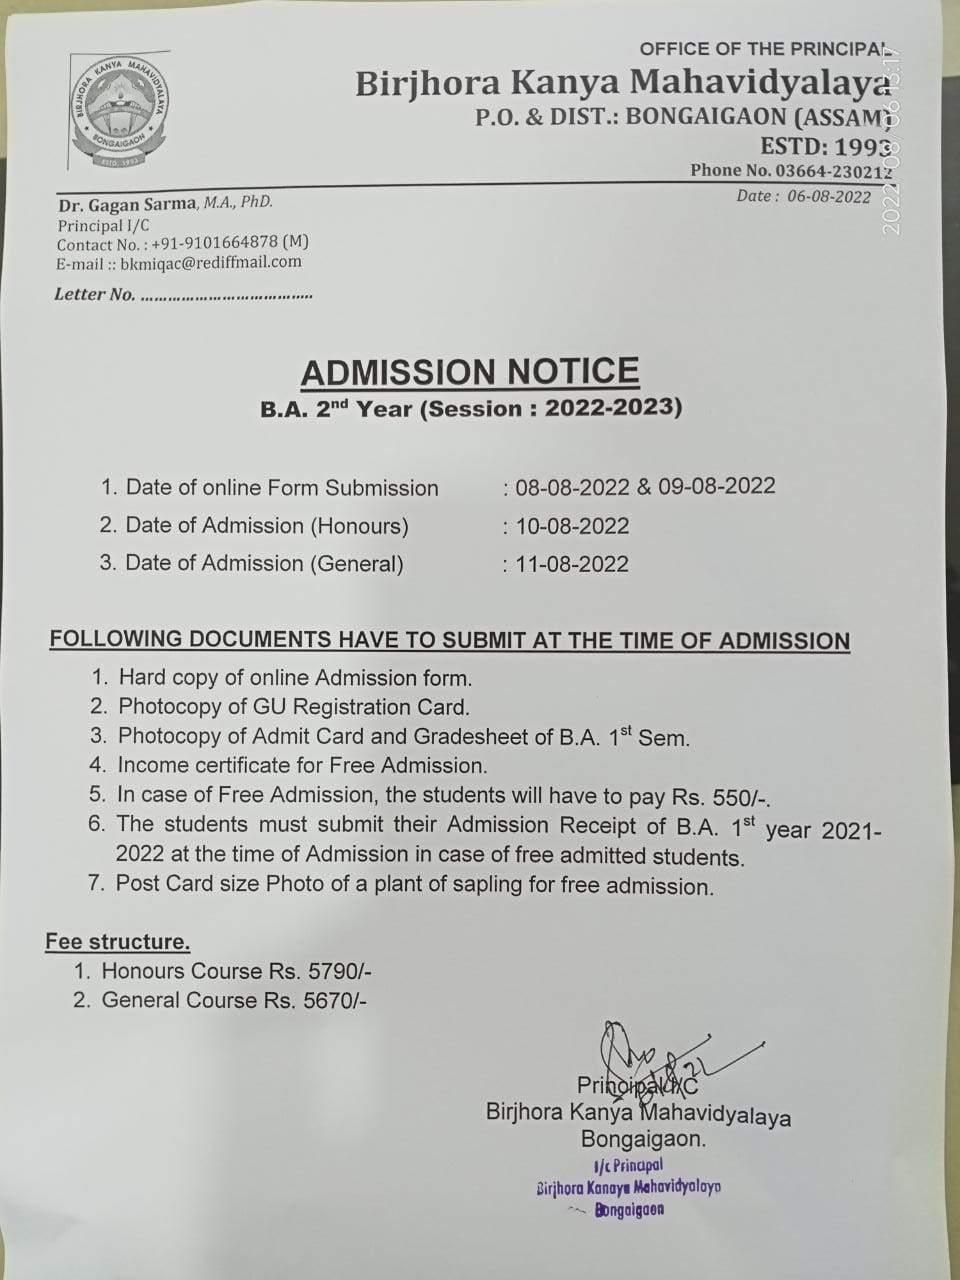 B.A. 2nd Year Admission Notice 2022